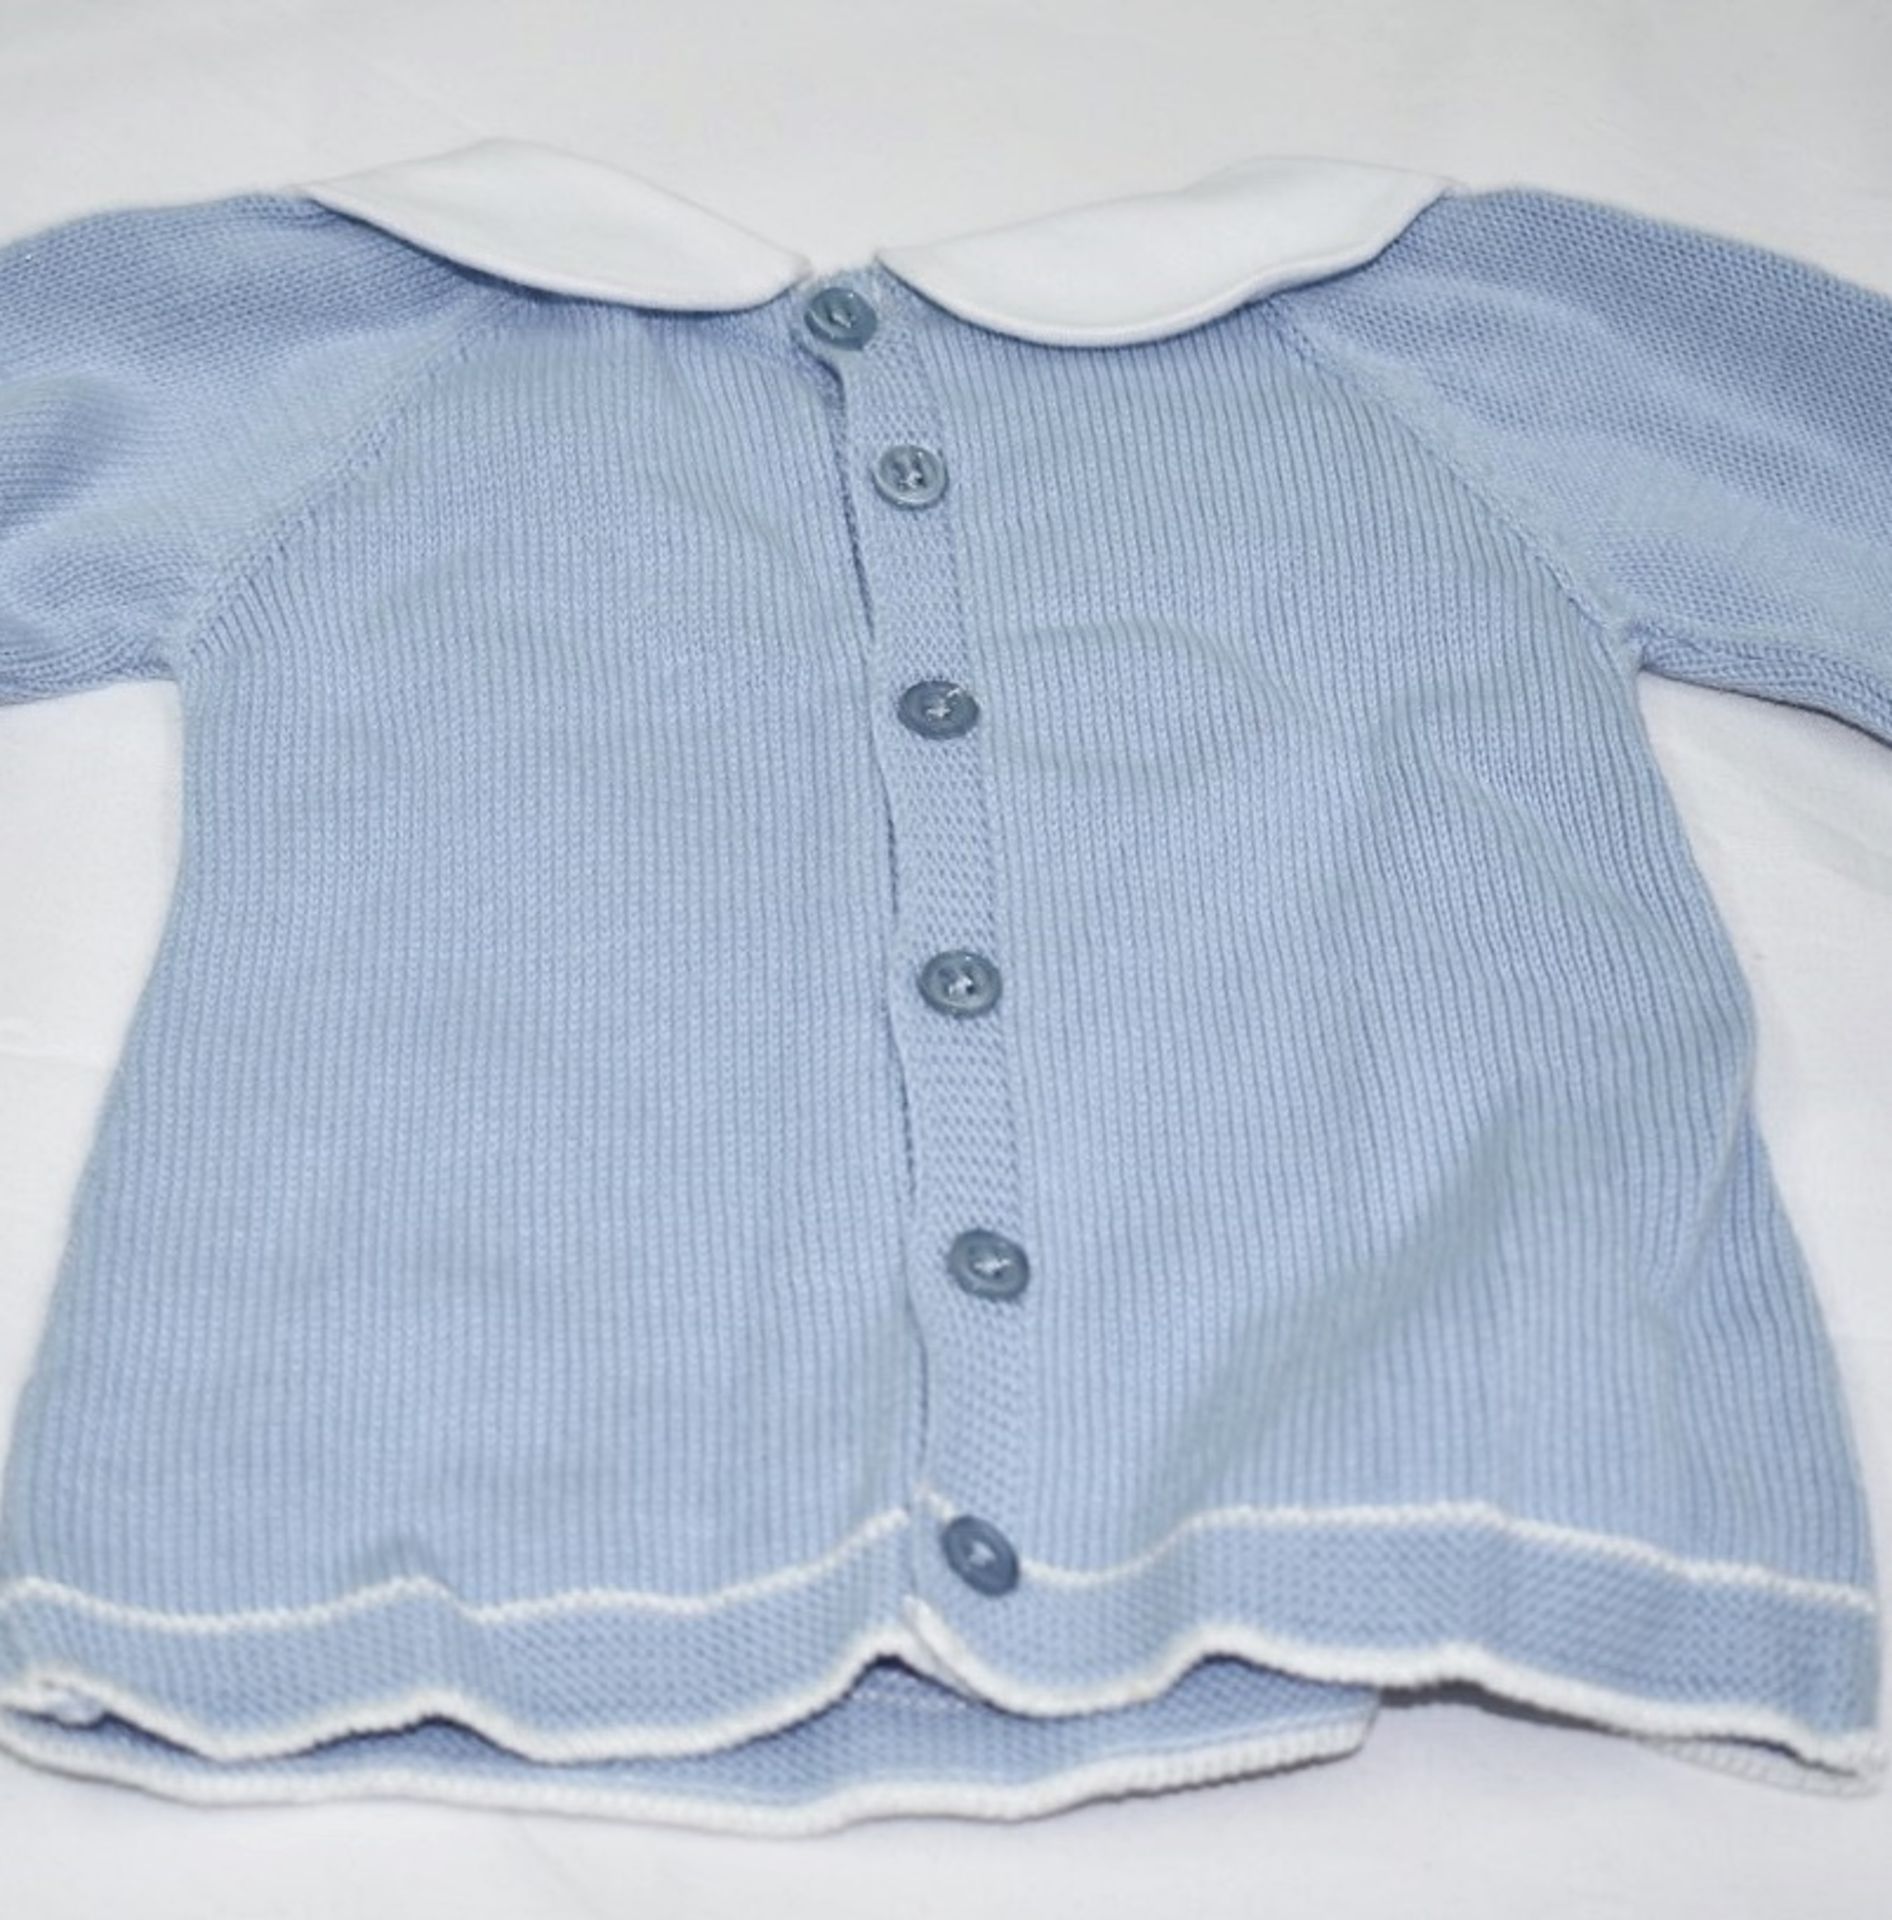 1 x PAZ RODRIGUEZ 2-Piece Knitted (Sweater, Pants) Set, in Cloud Blue, 6mth - Original Price £79.95 - Image 6 of 7